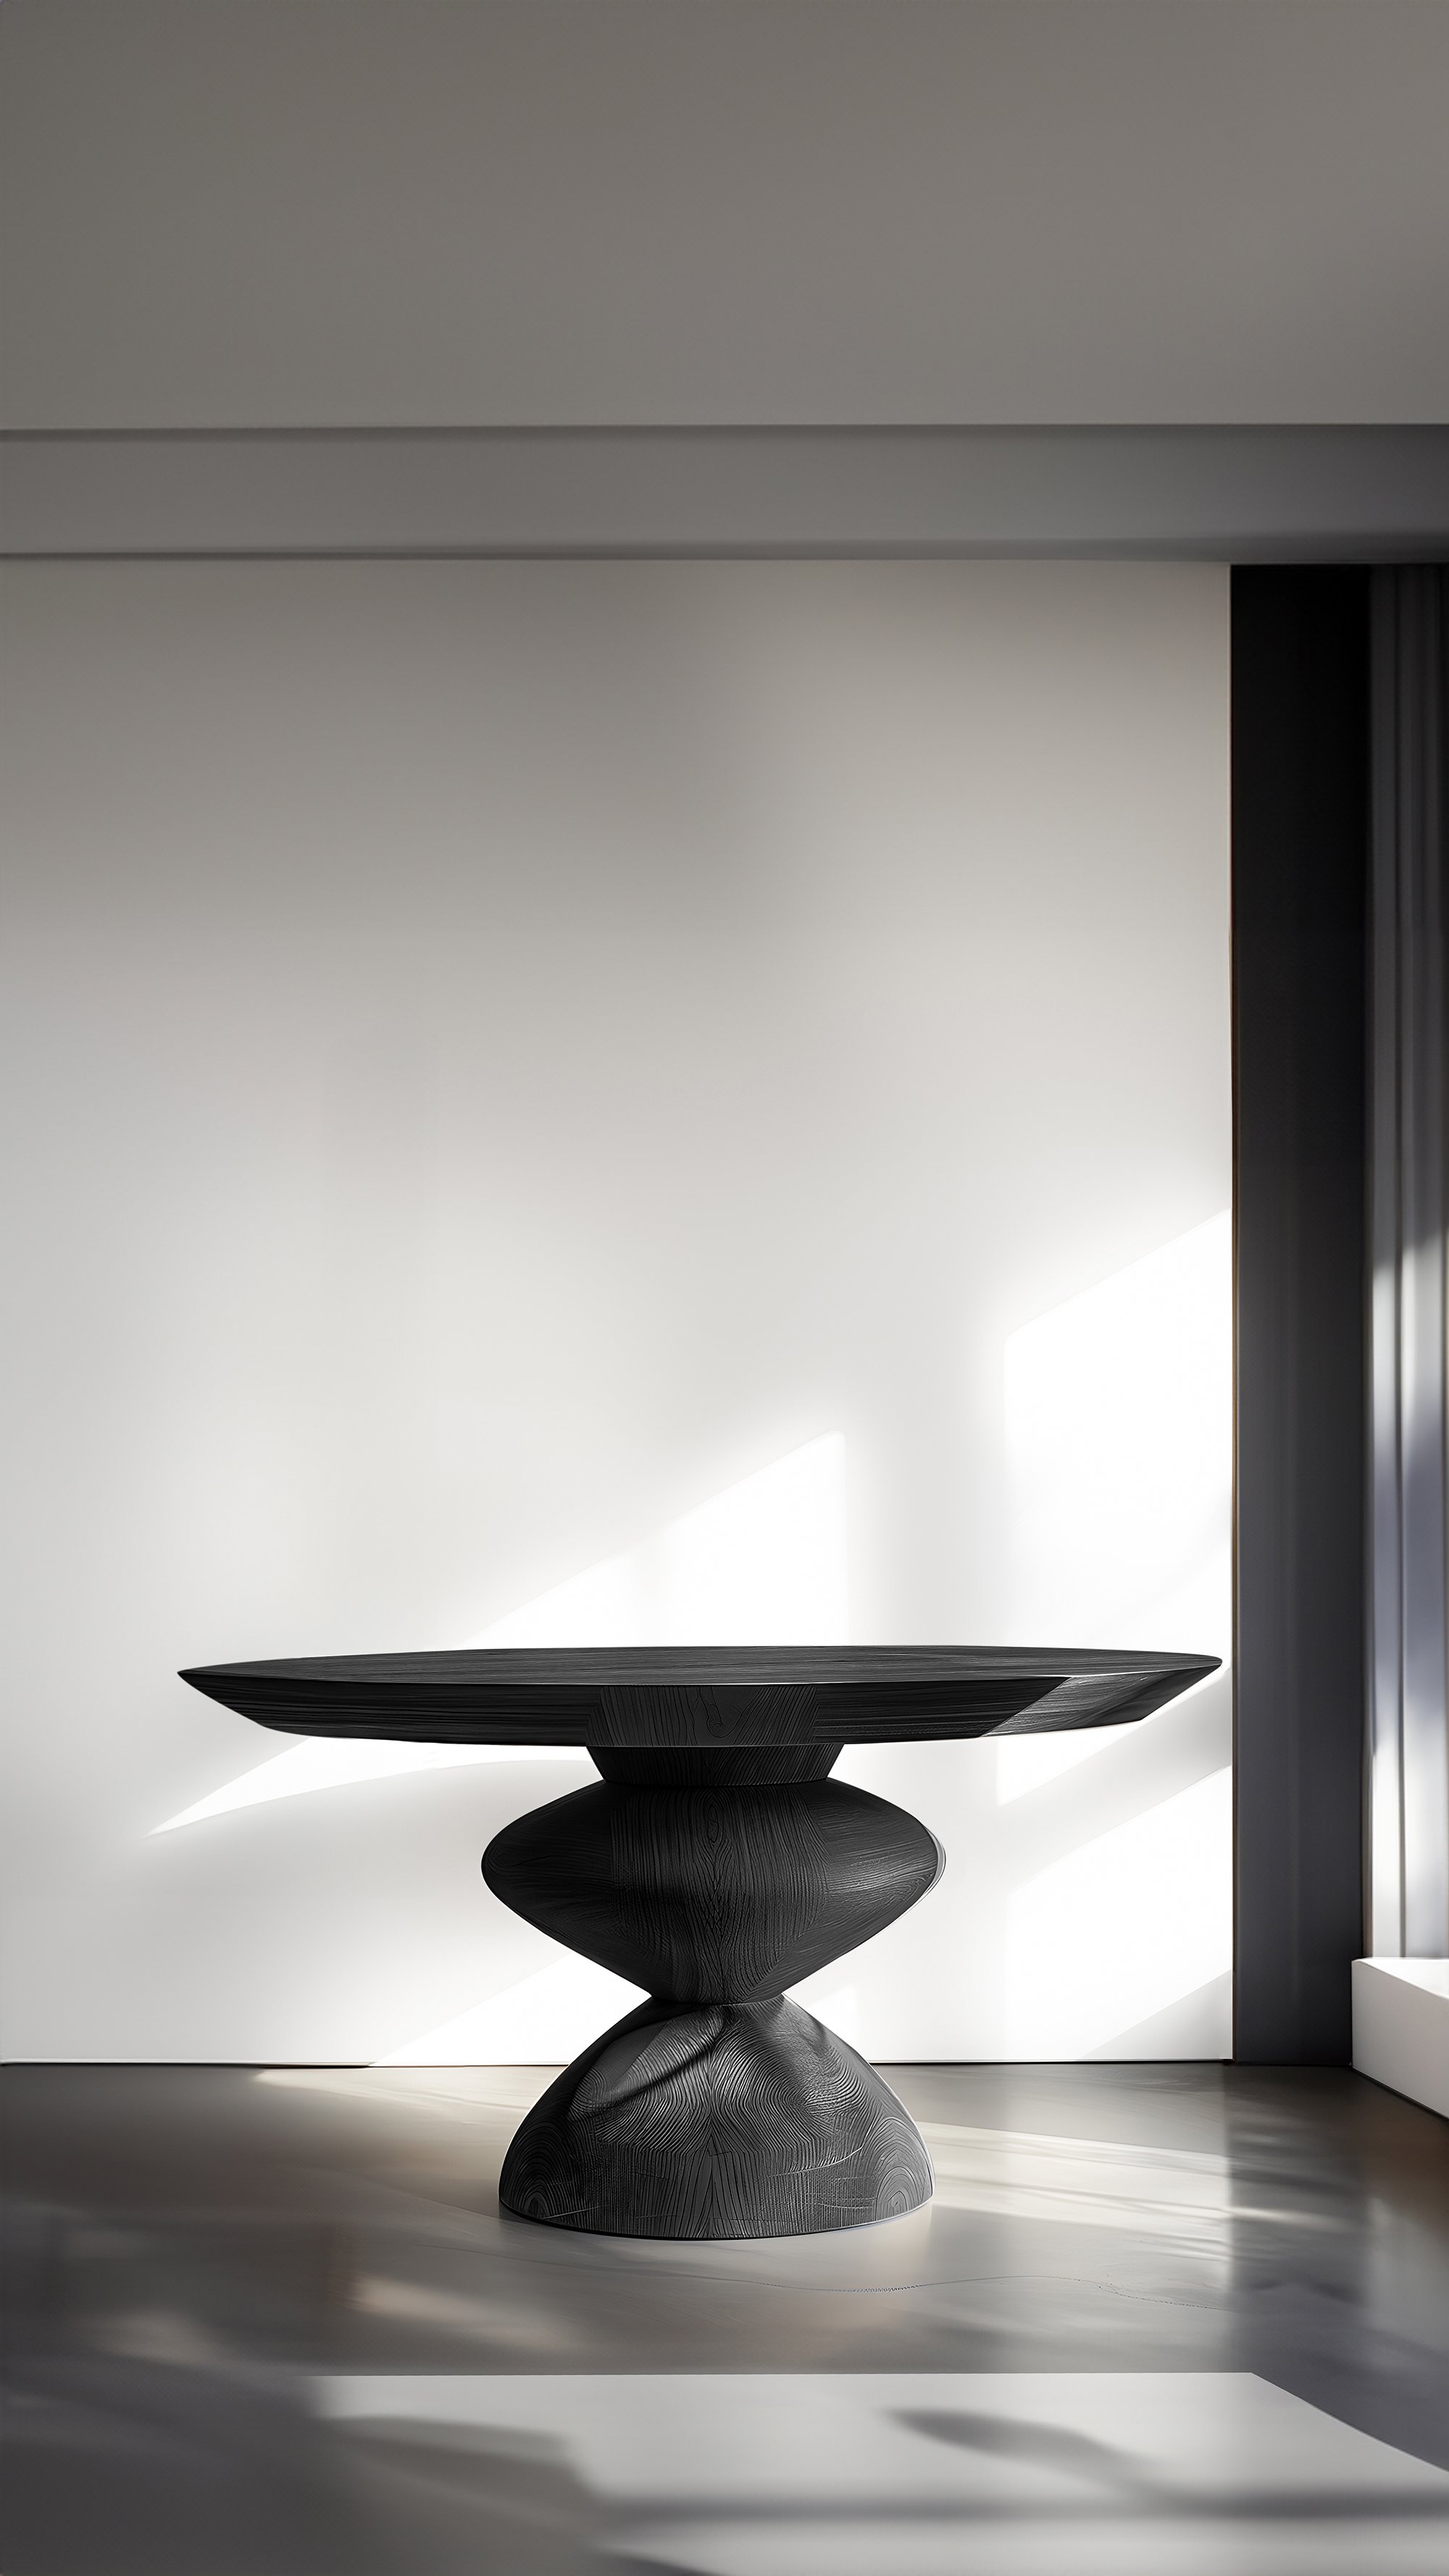 Socle Series No15, Console Tables in Black Wood by NONO - 9.jpg